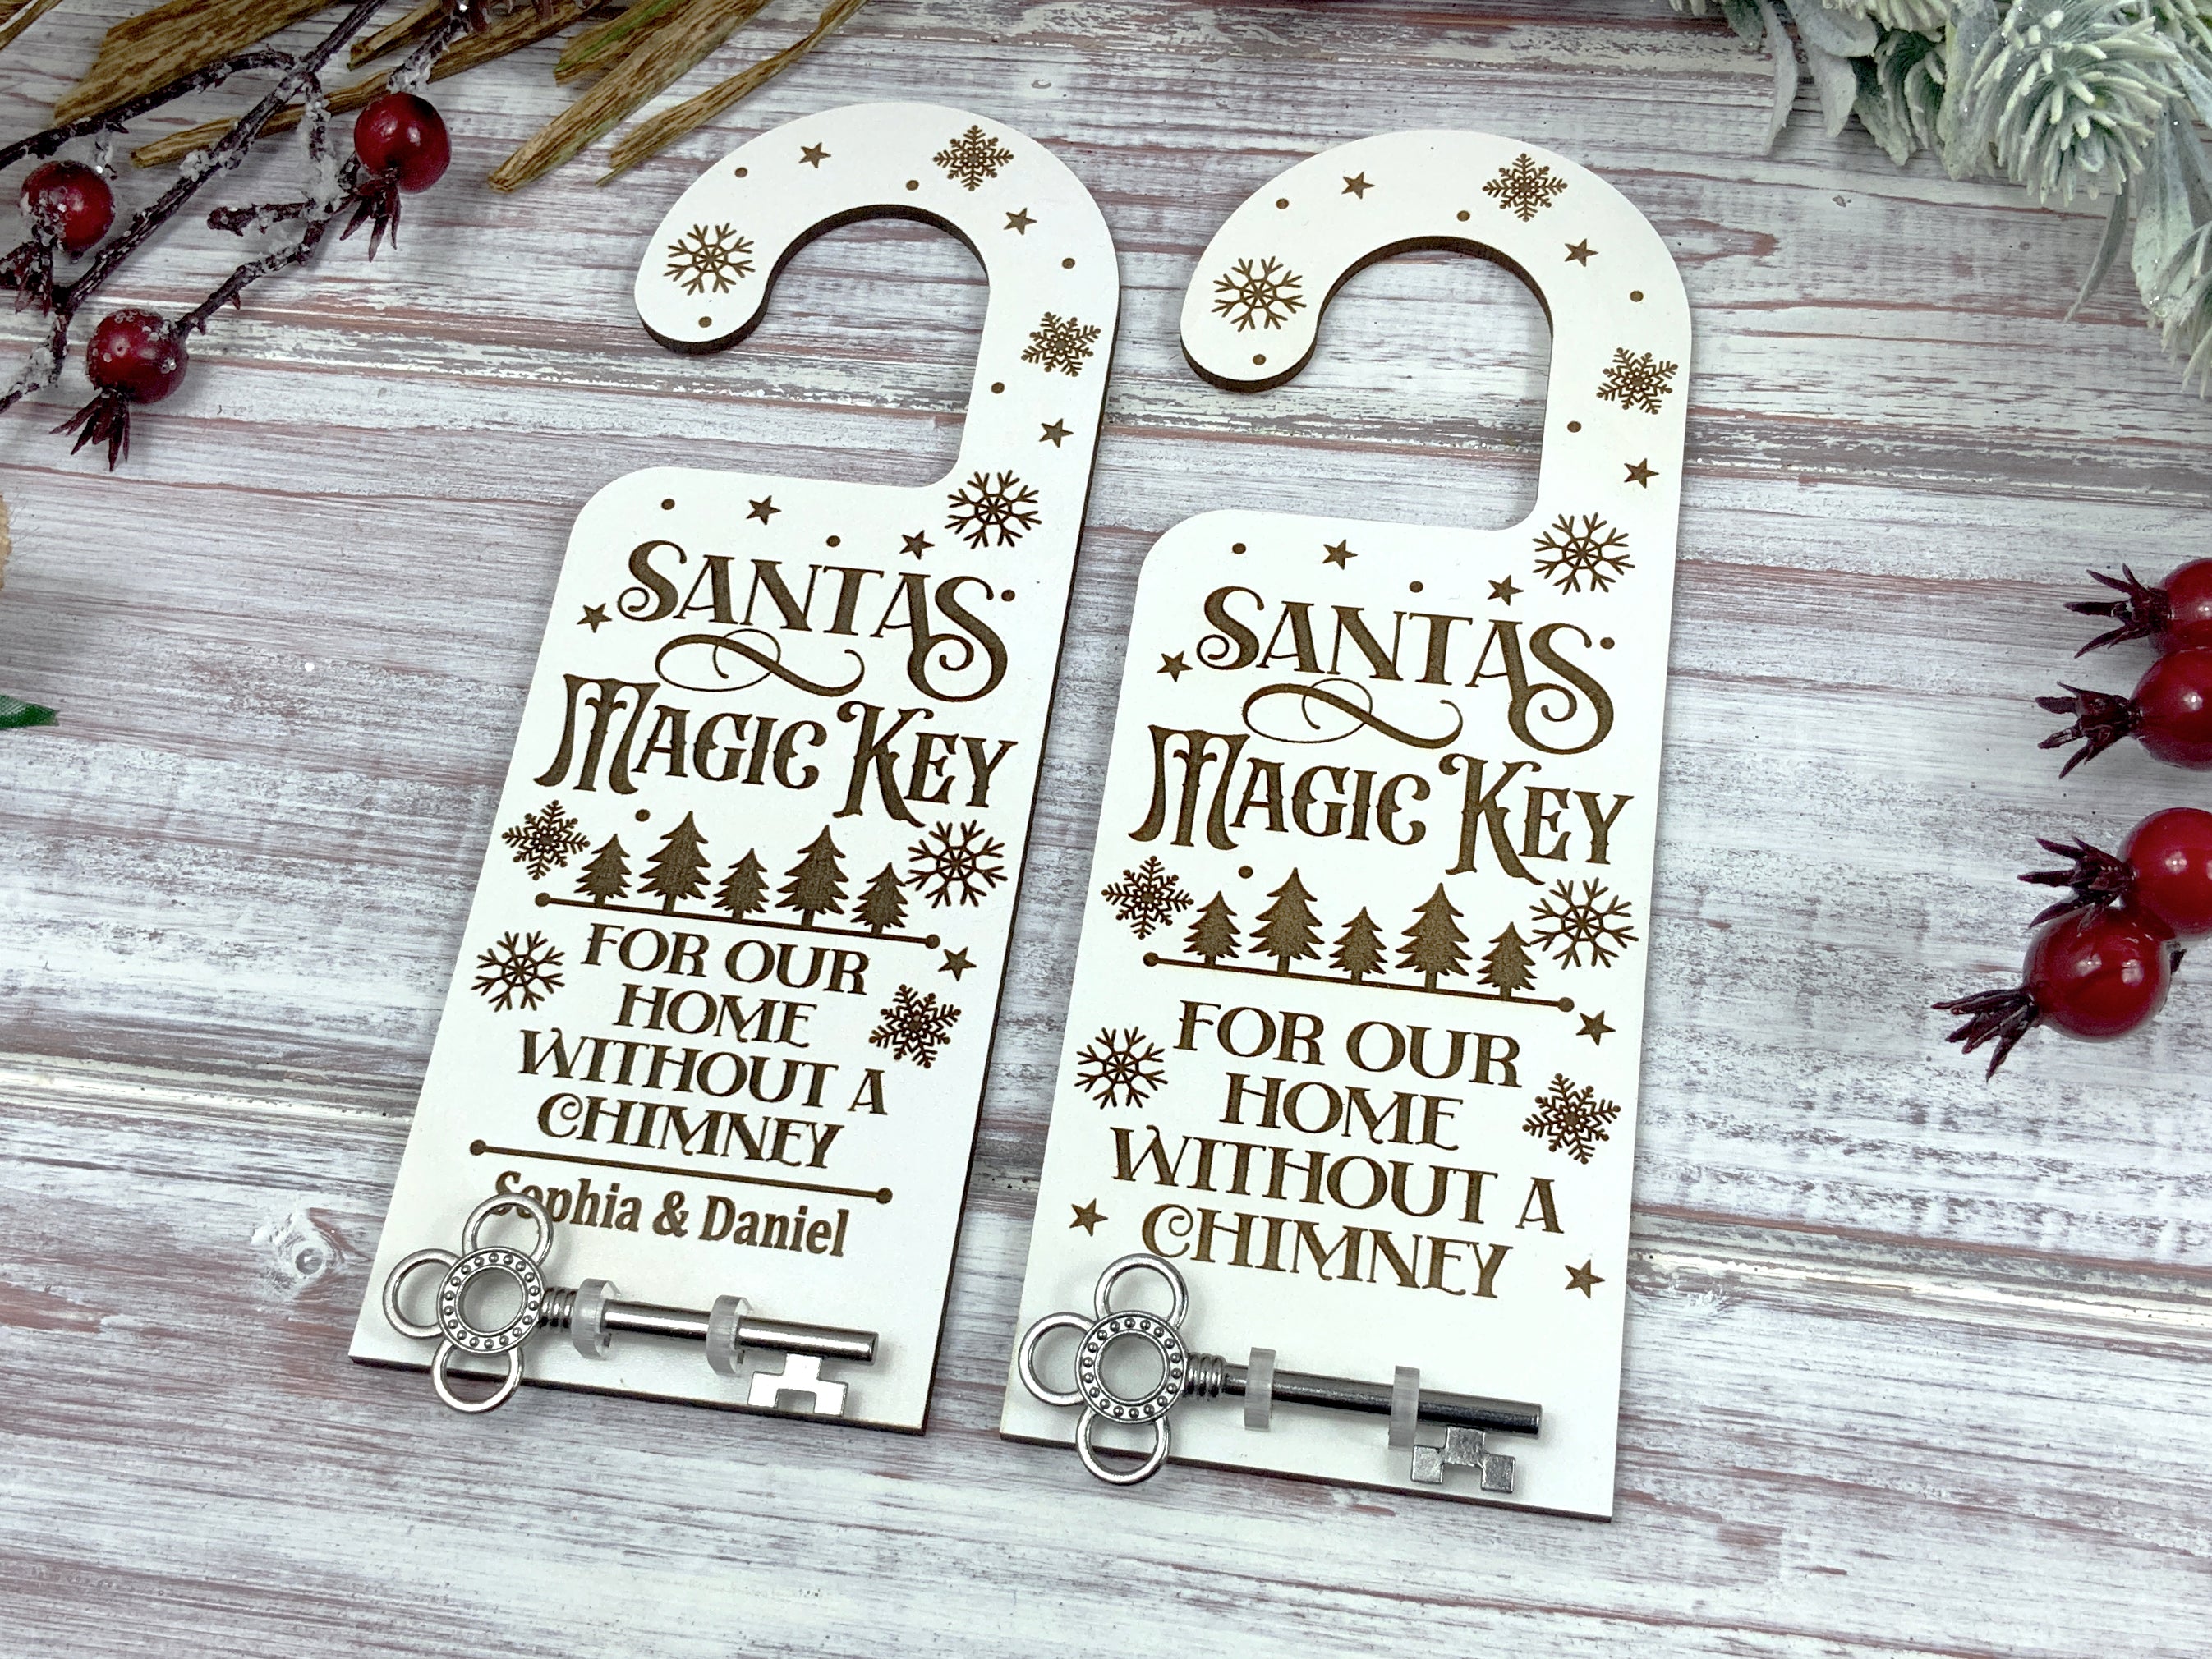 Santa's Key for Home with No Chimney